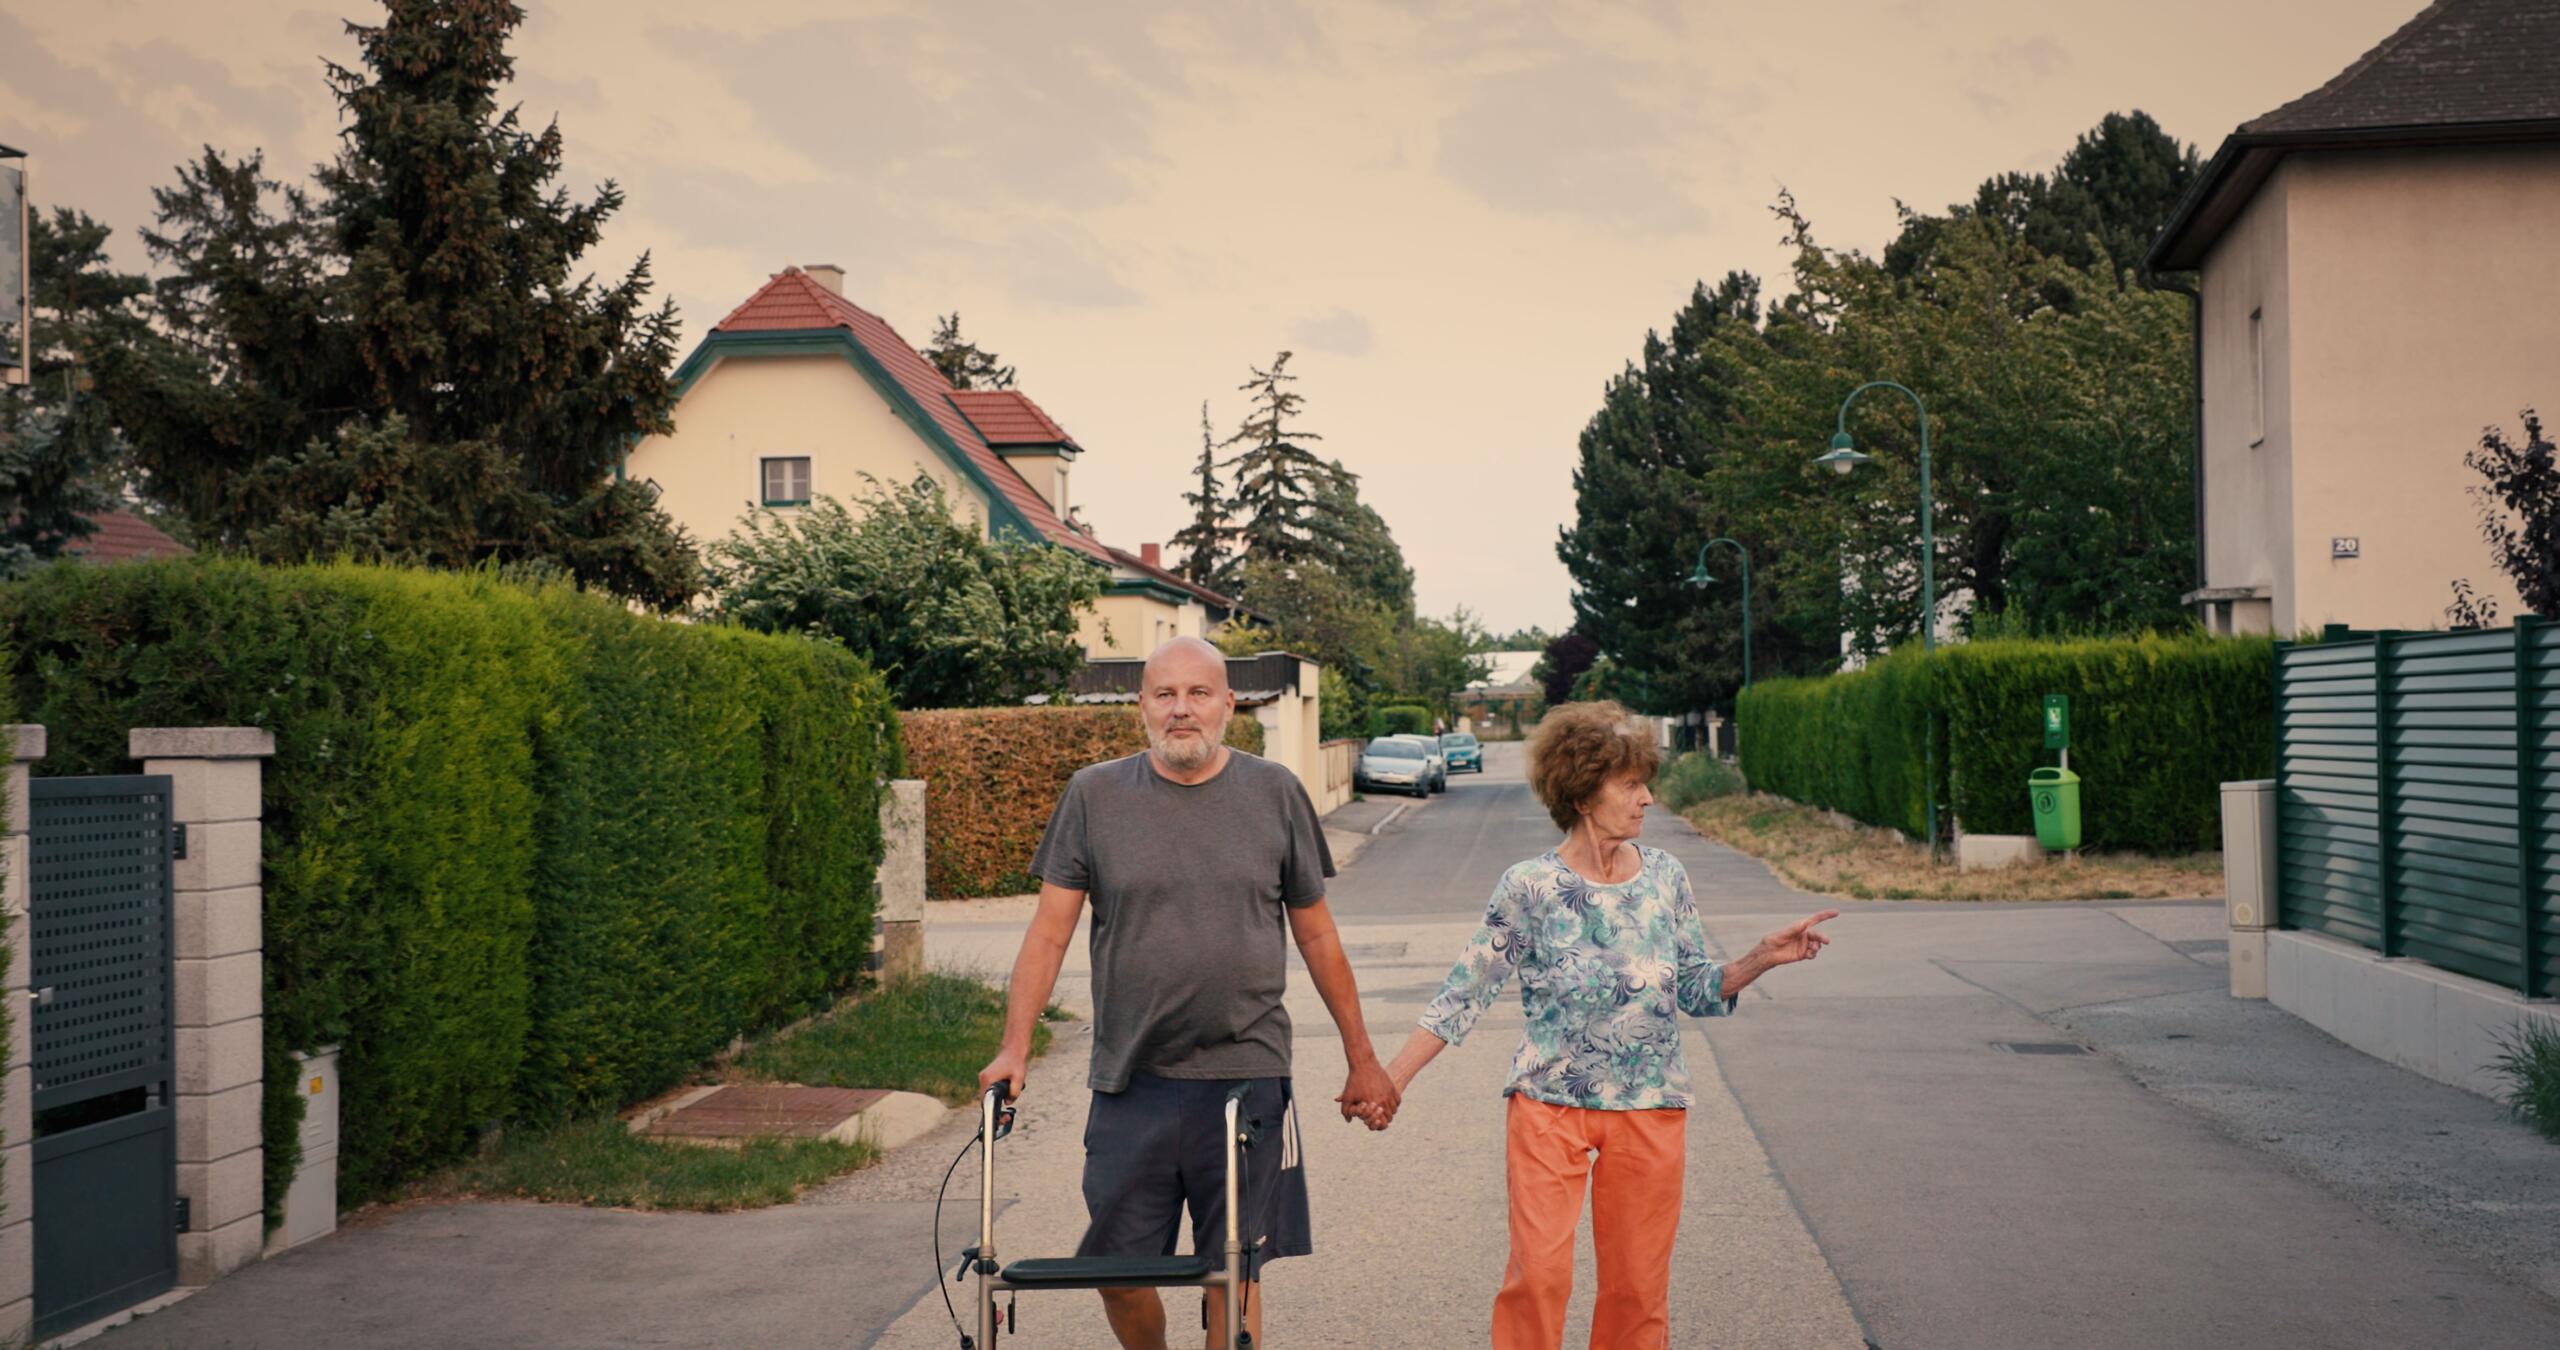 A middle-aged man and an old woman walk through a housing estate.